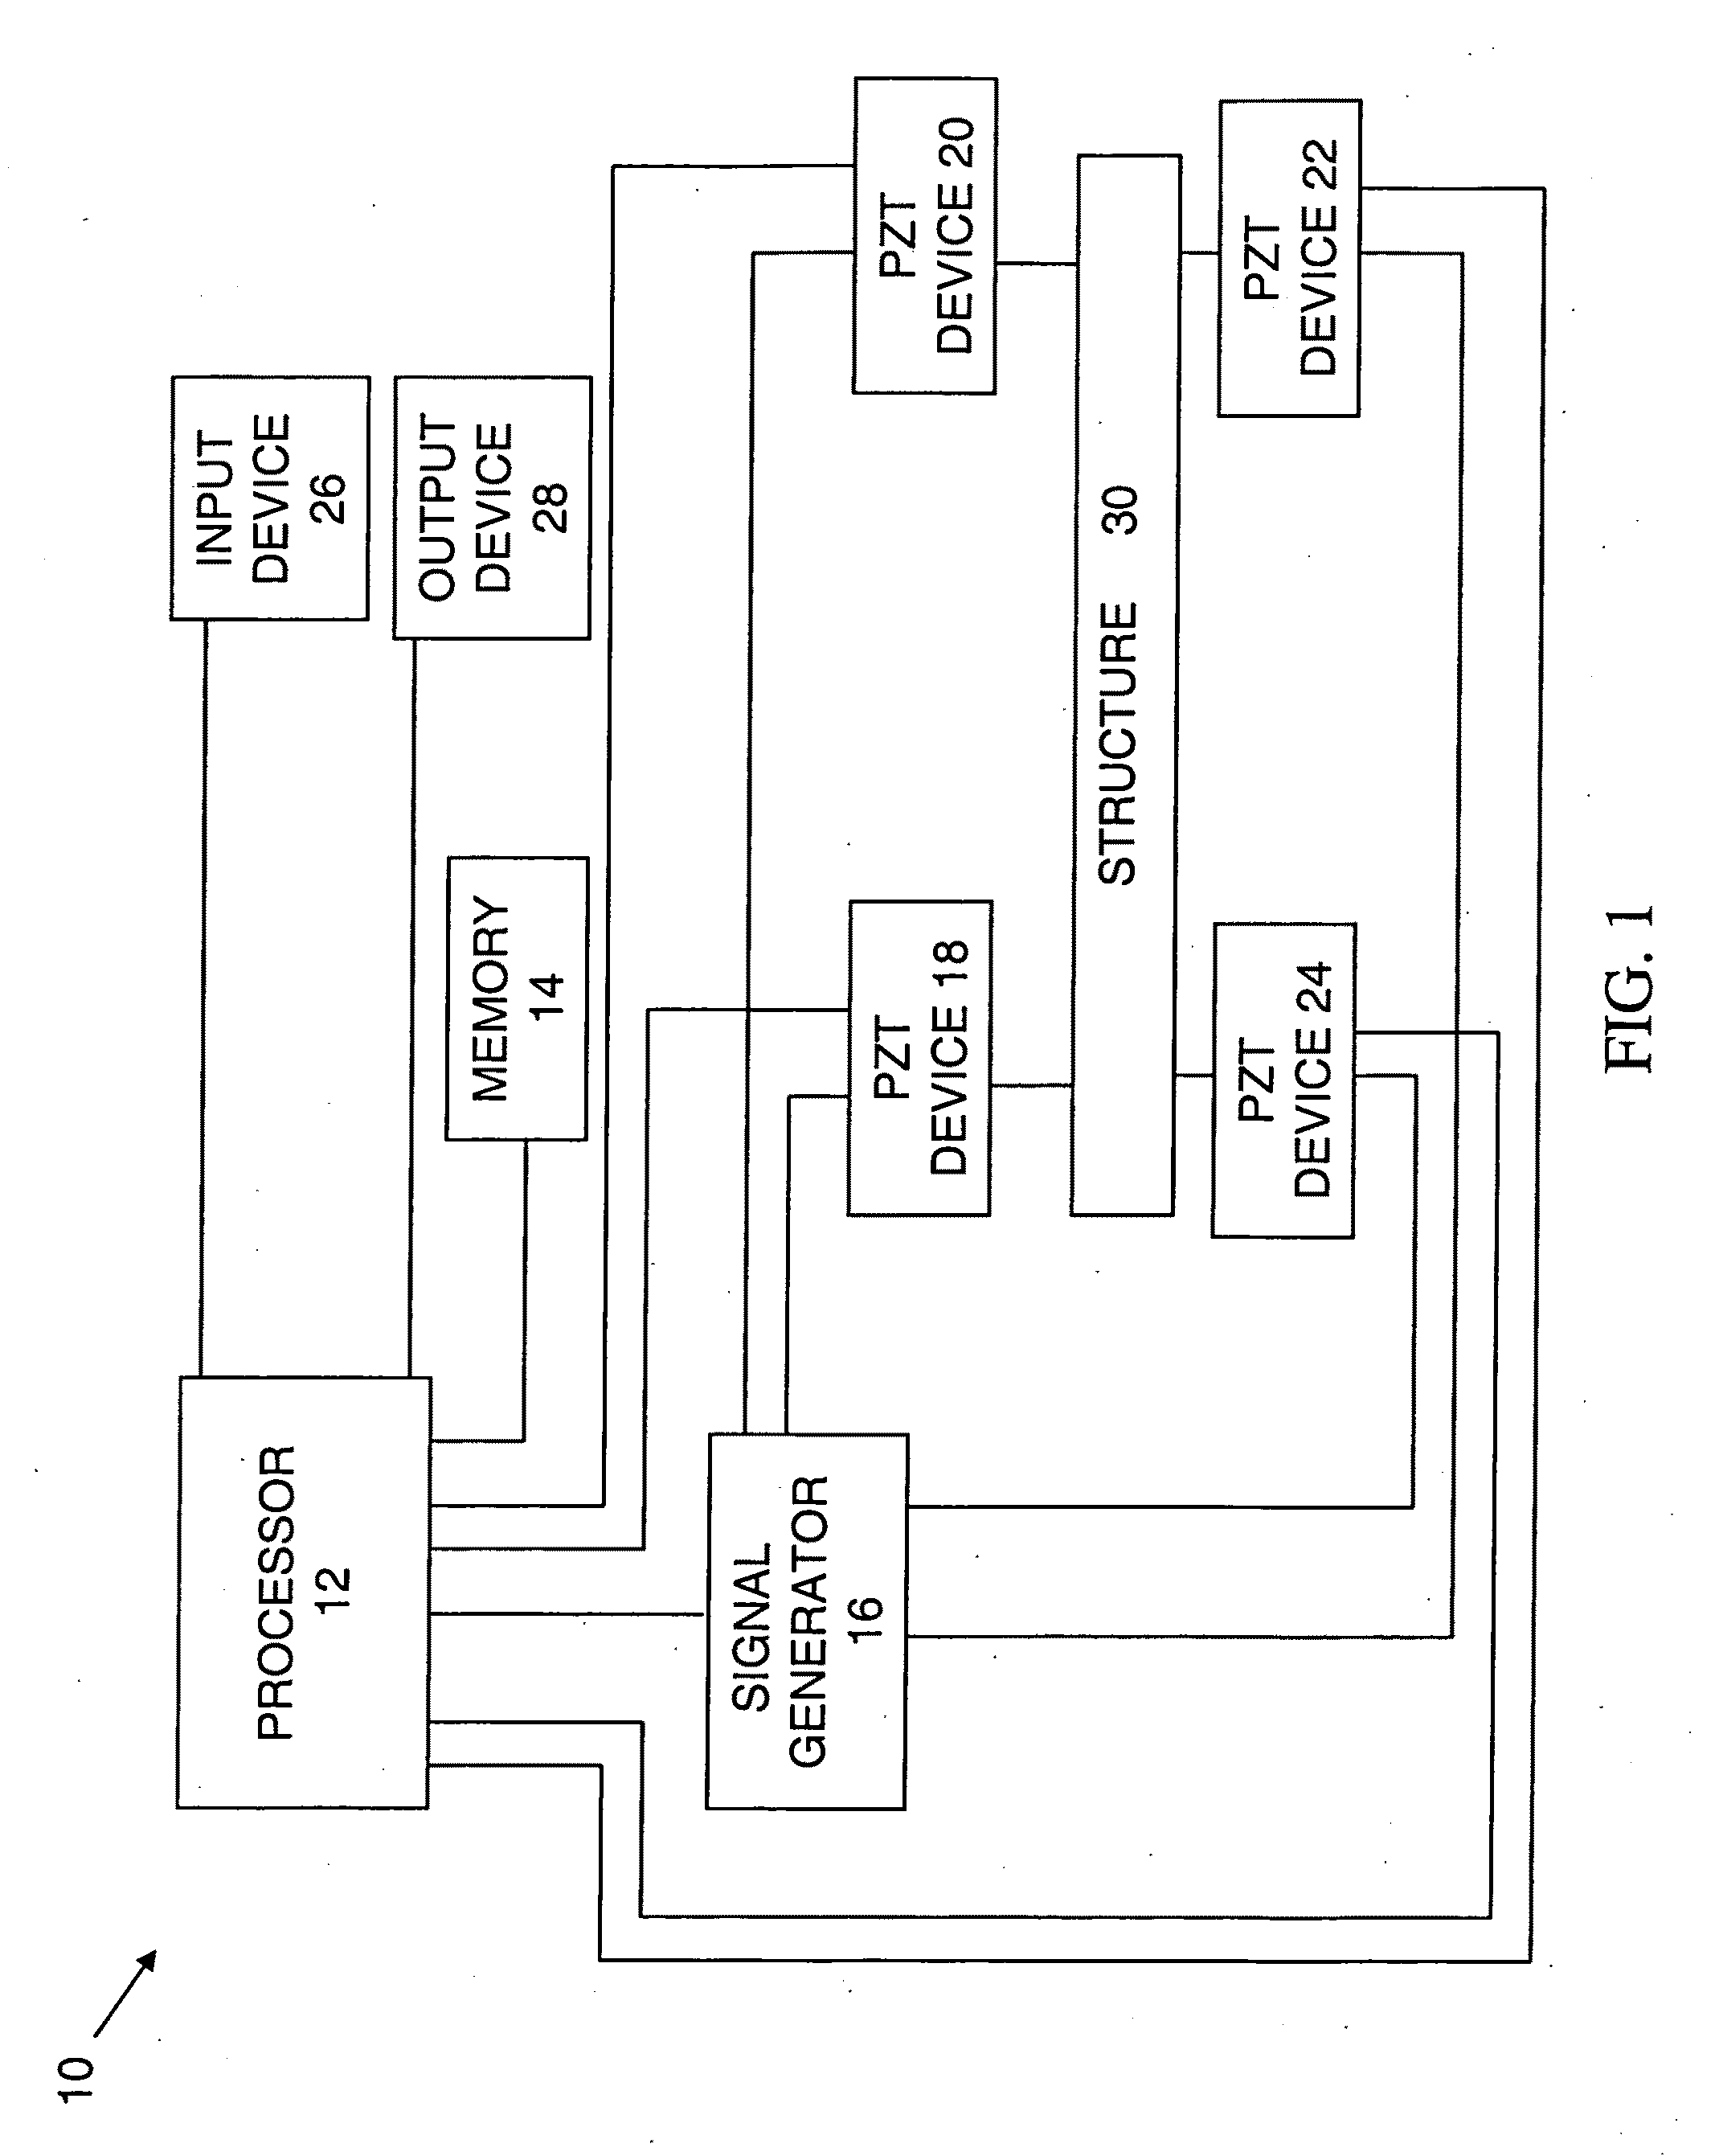 Methods, Apparatuses, and Systems for Damage Detection